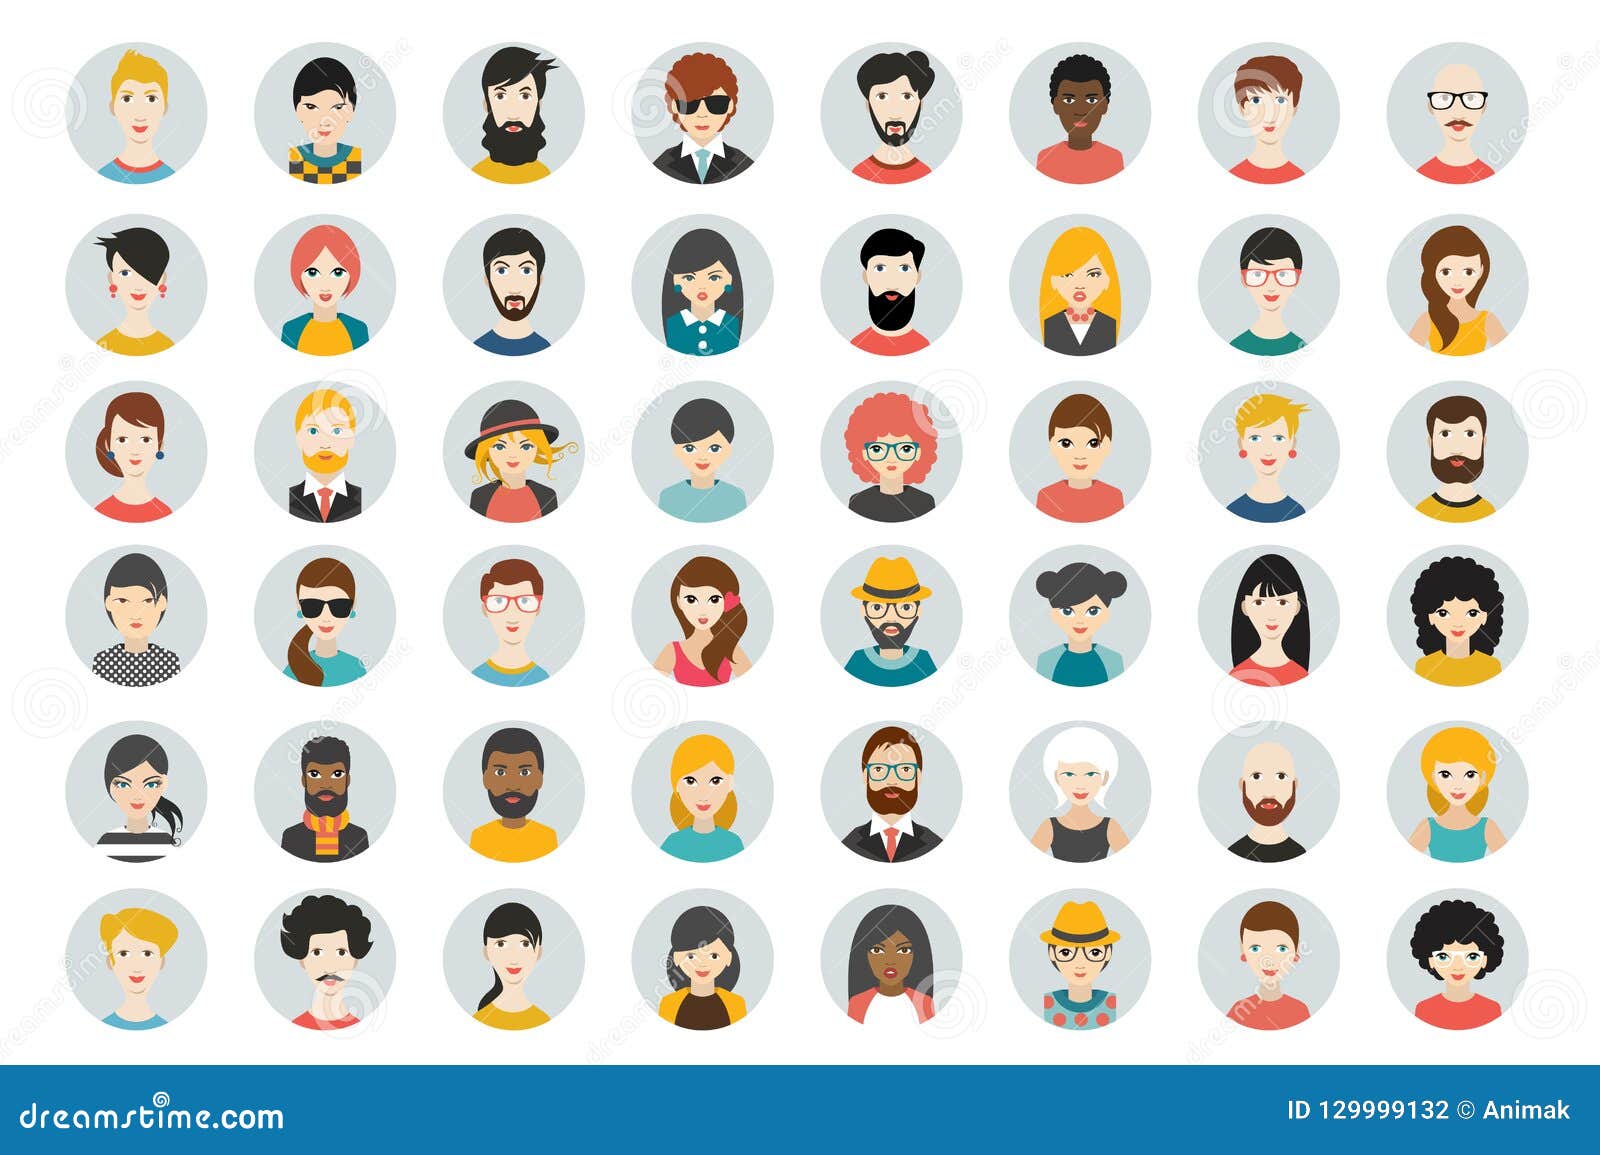 set of circle persons, avatars, people heads different nationality in flat style.